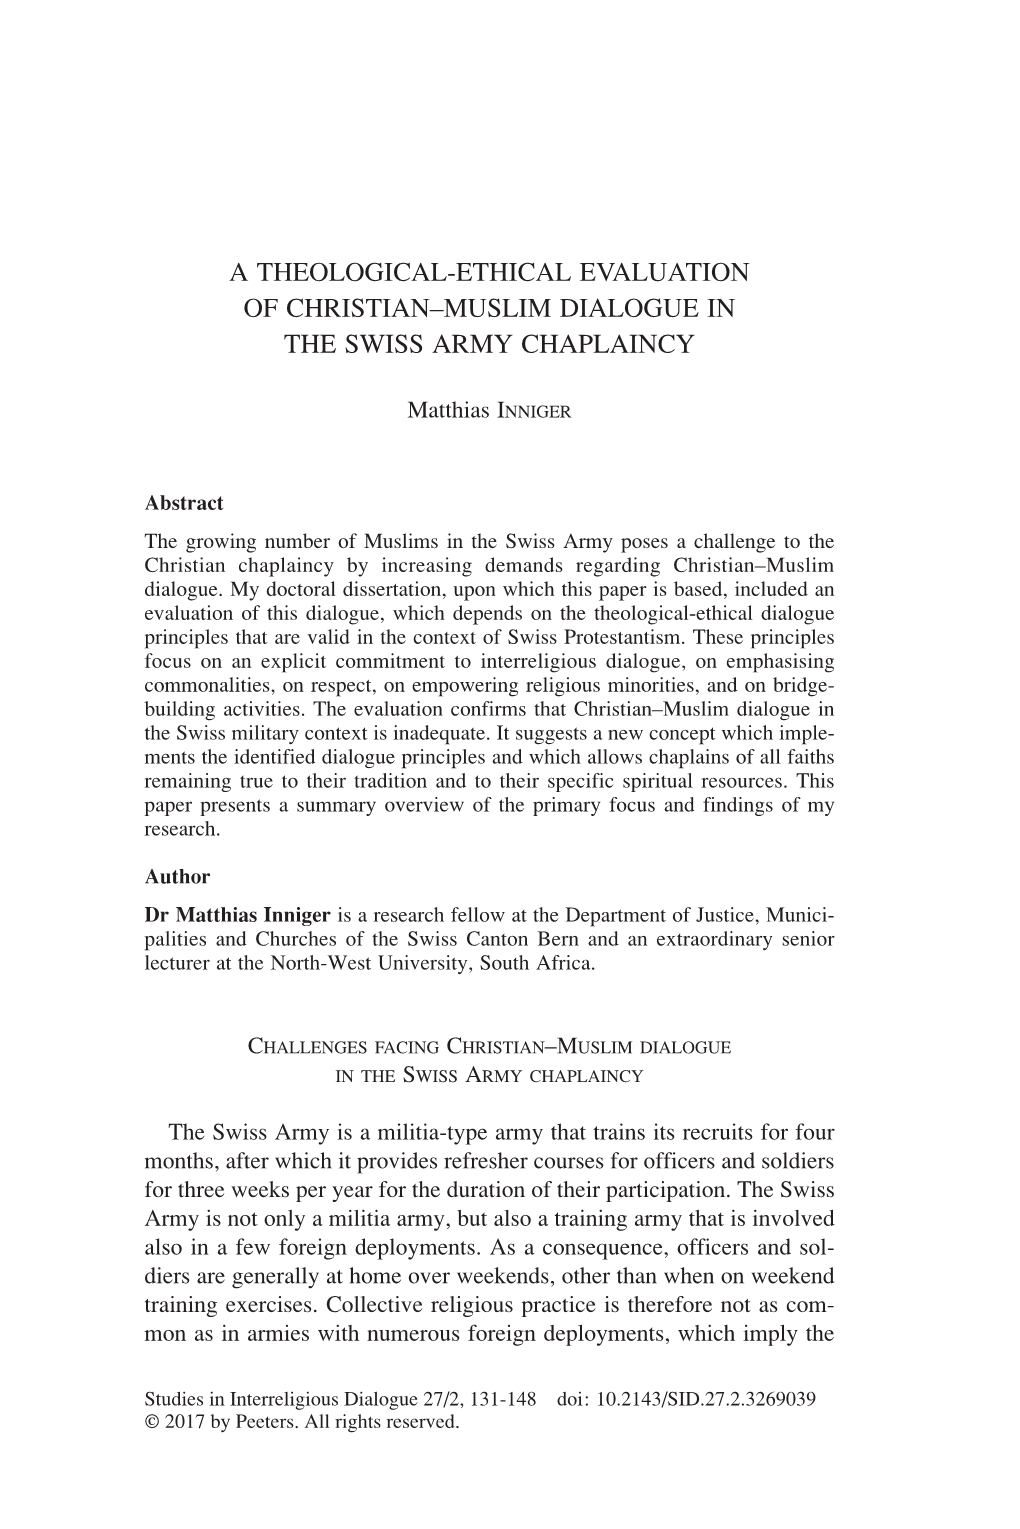 A Theological-Ethical Evaluation of Christian–Muslim Dialogue in the Swiss Army Chaplaincy